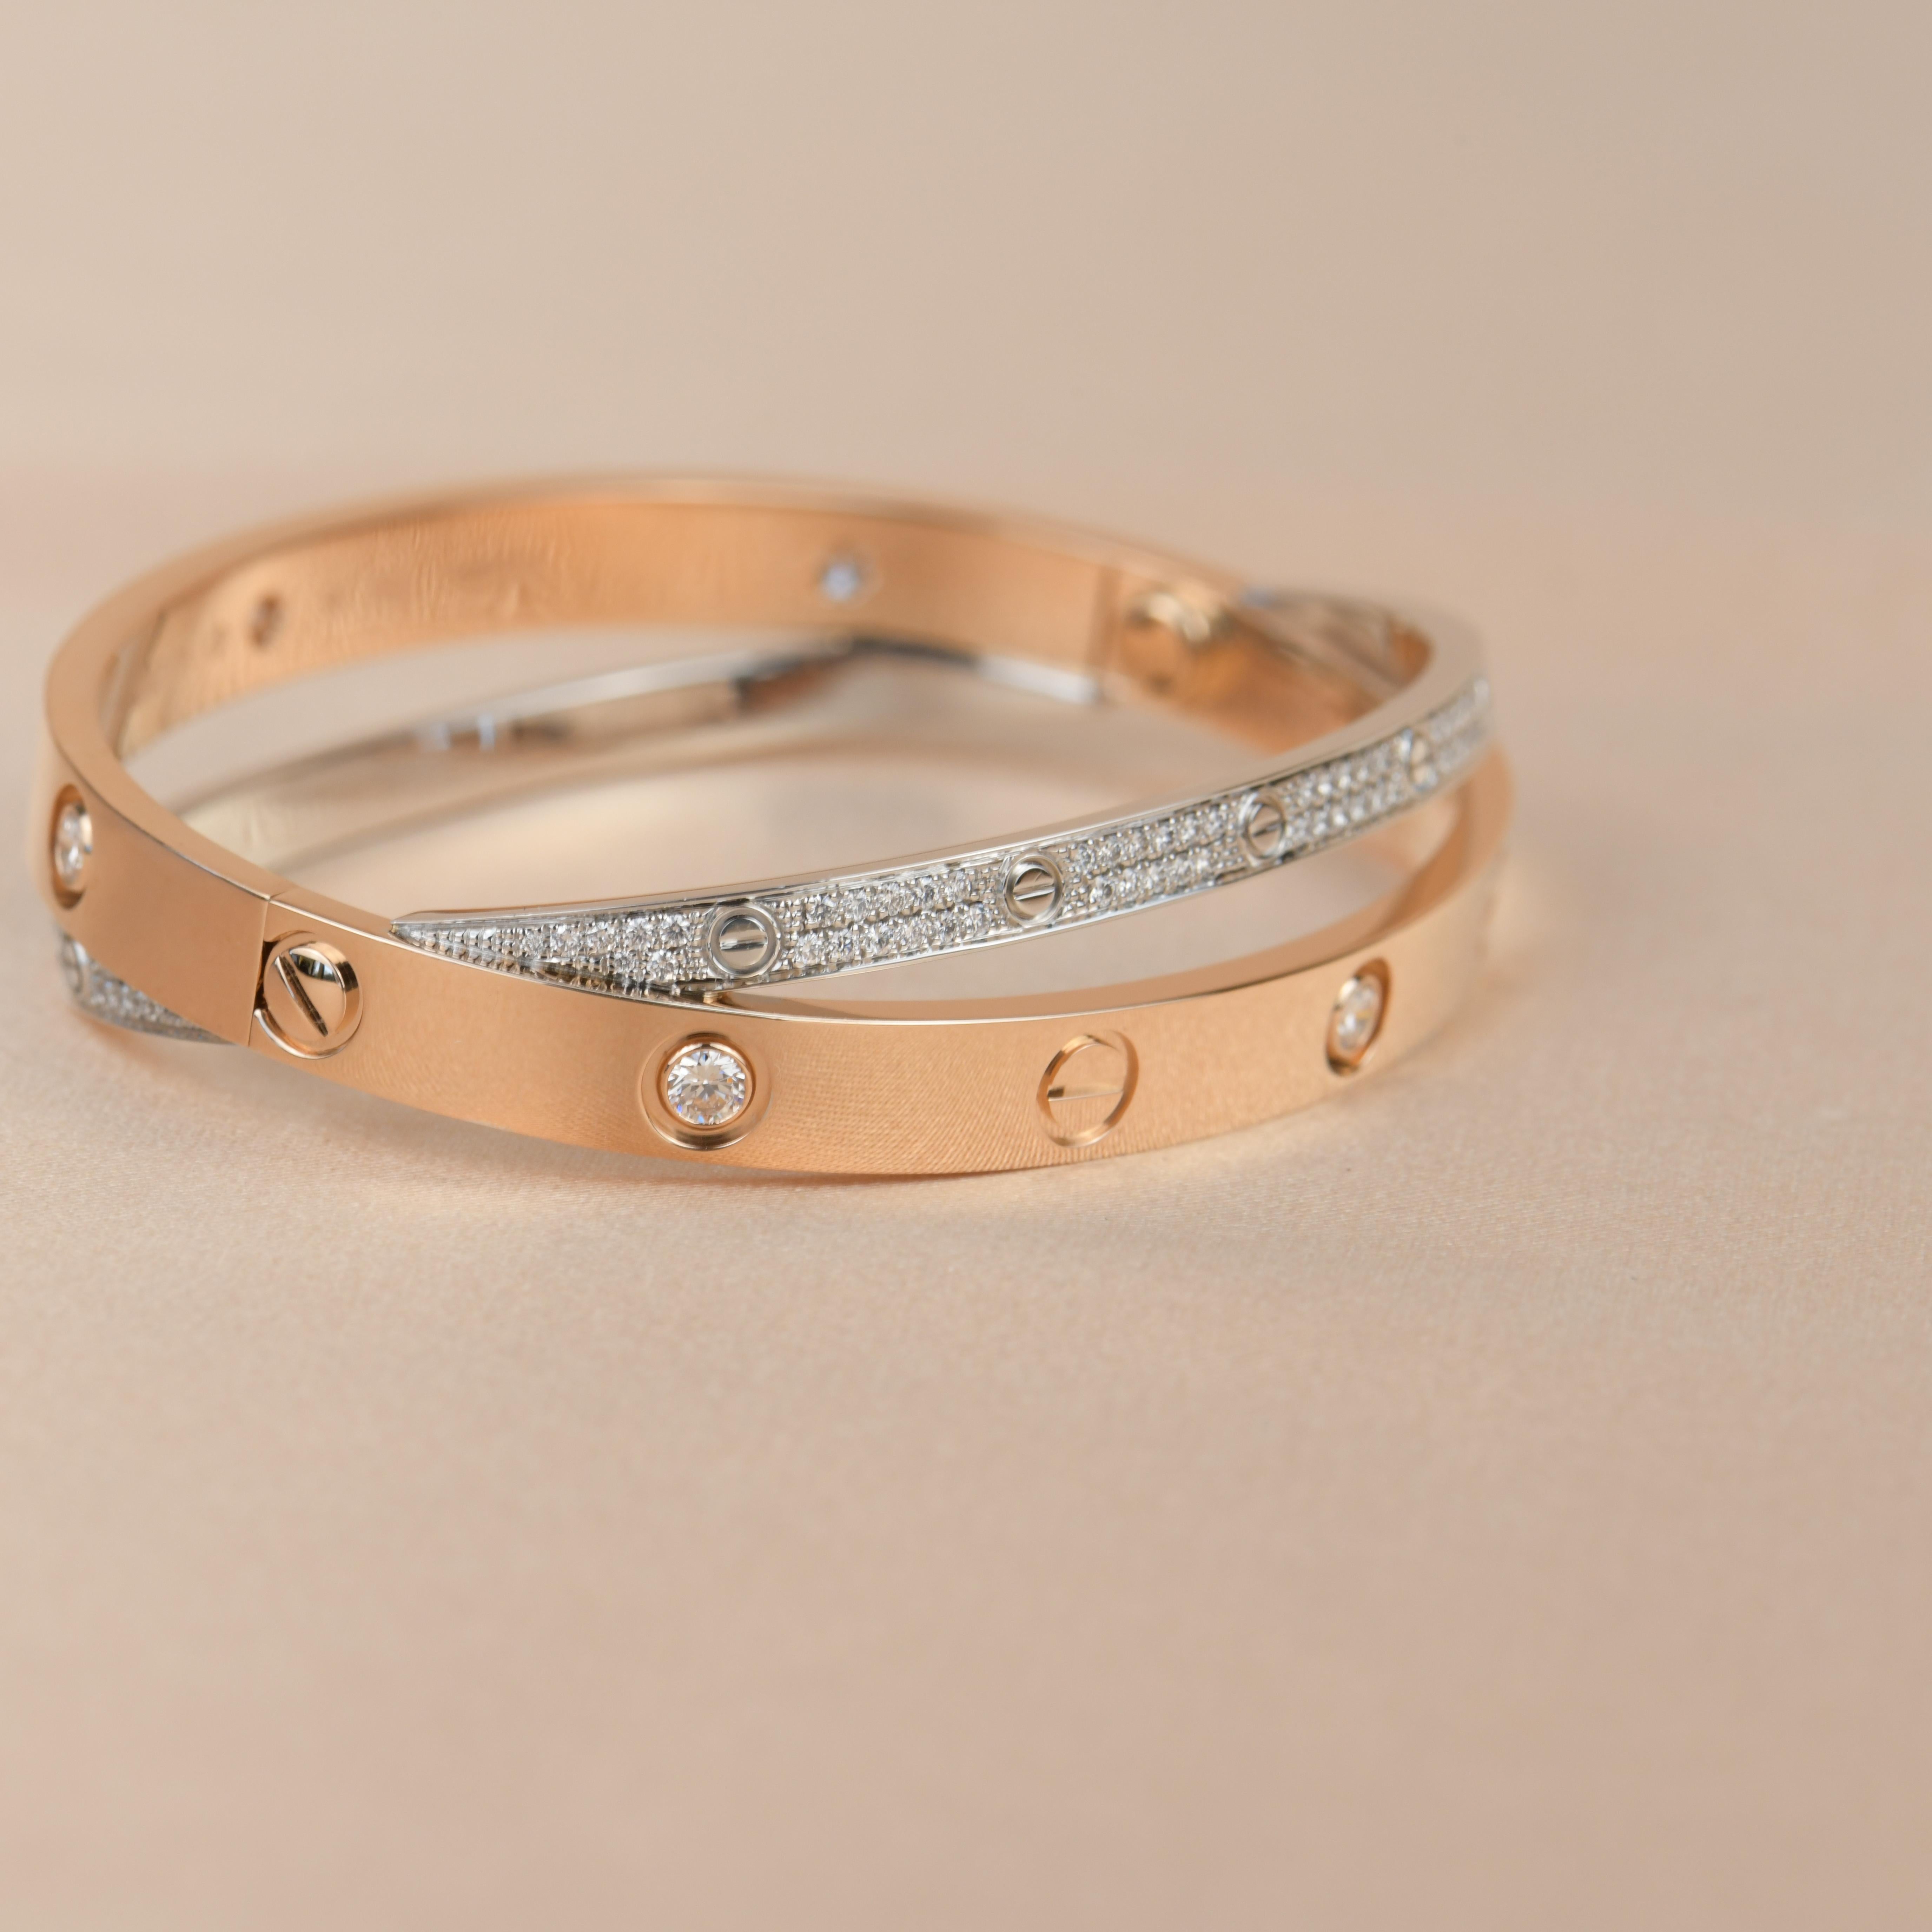 Women's or Men's Cartier Love Bracelet Set in Rose and White Gold Pave Diamond